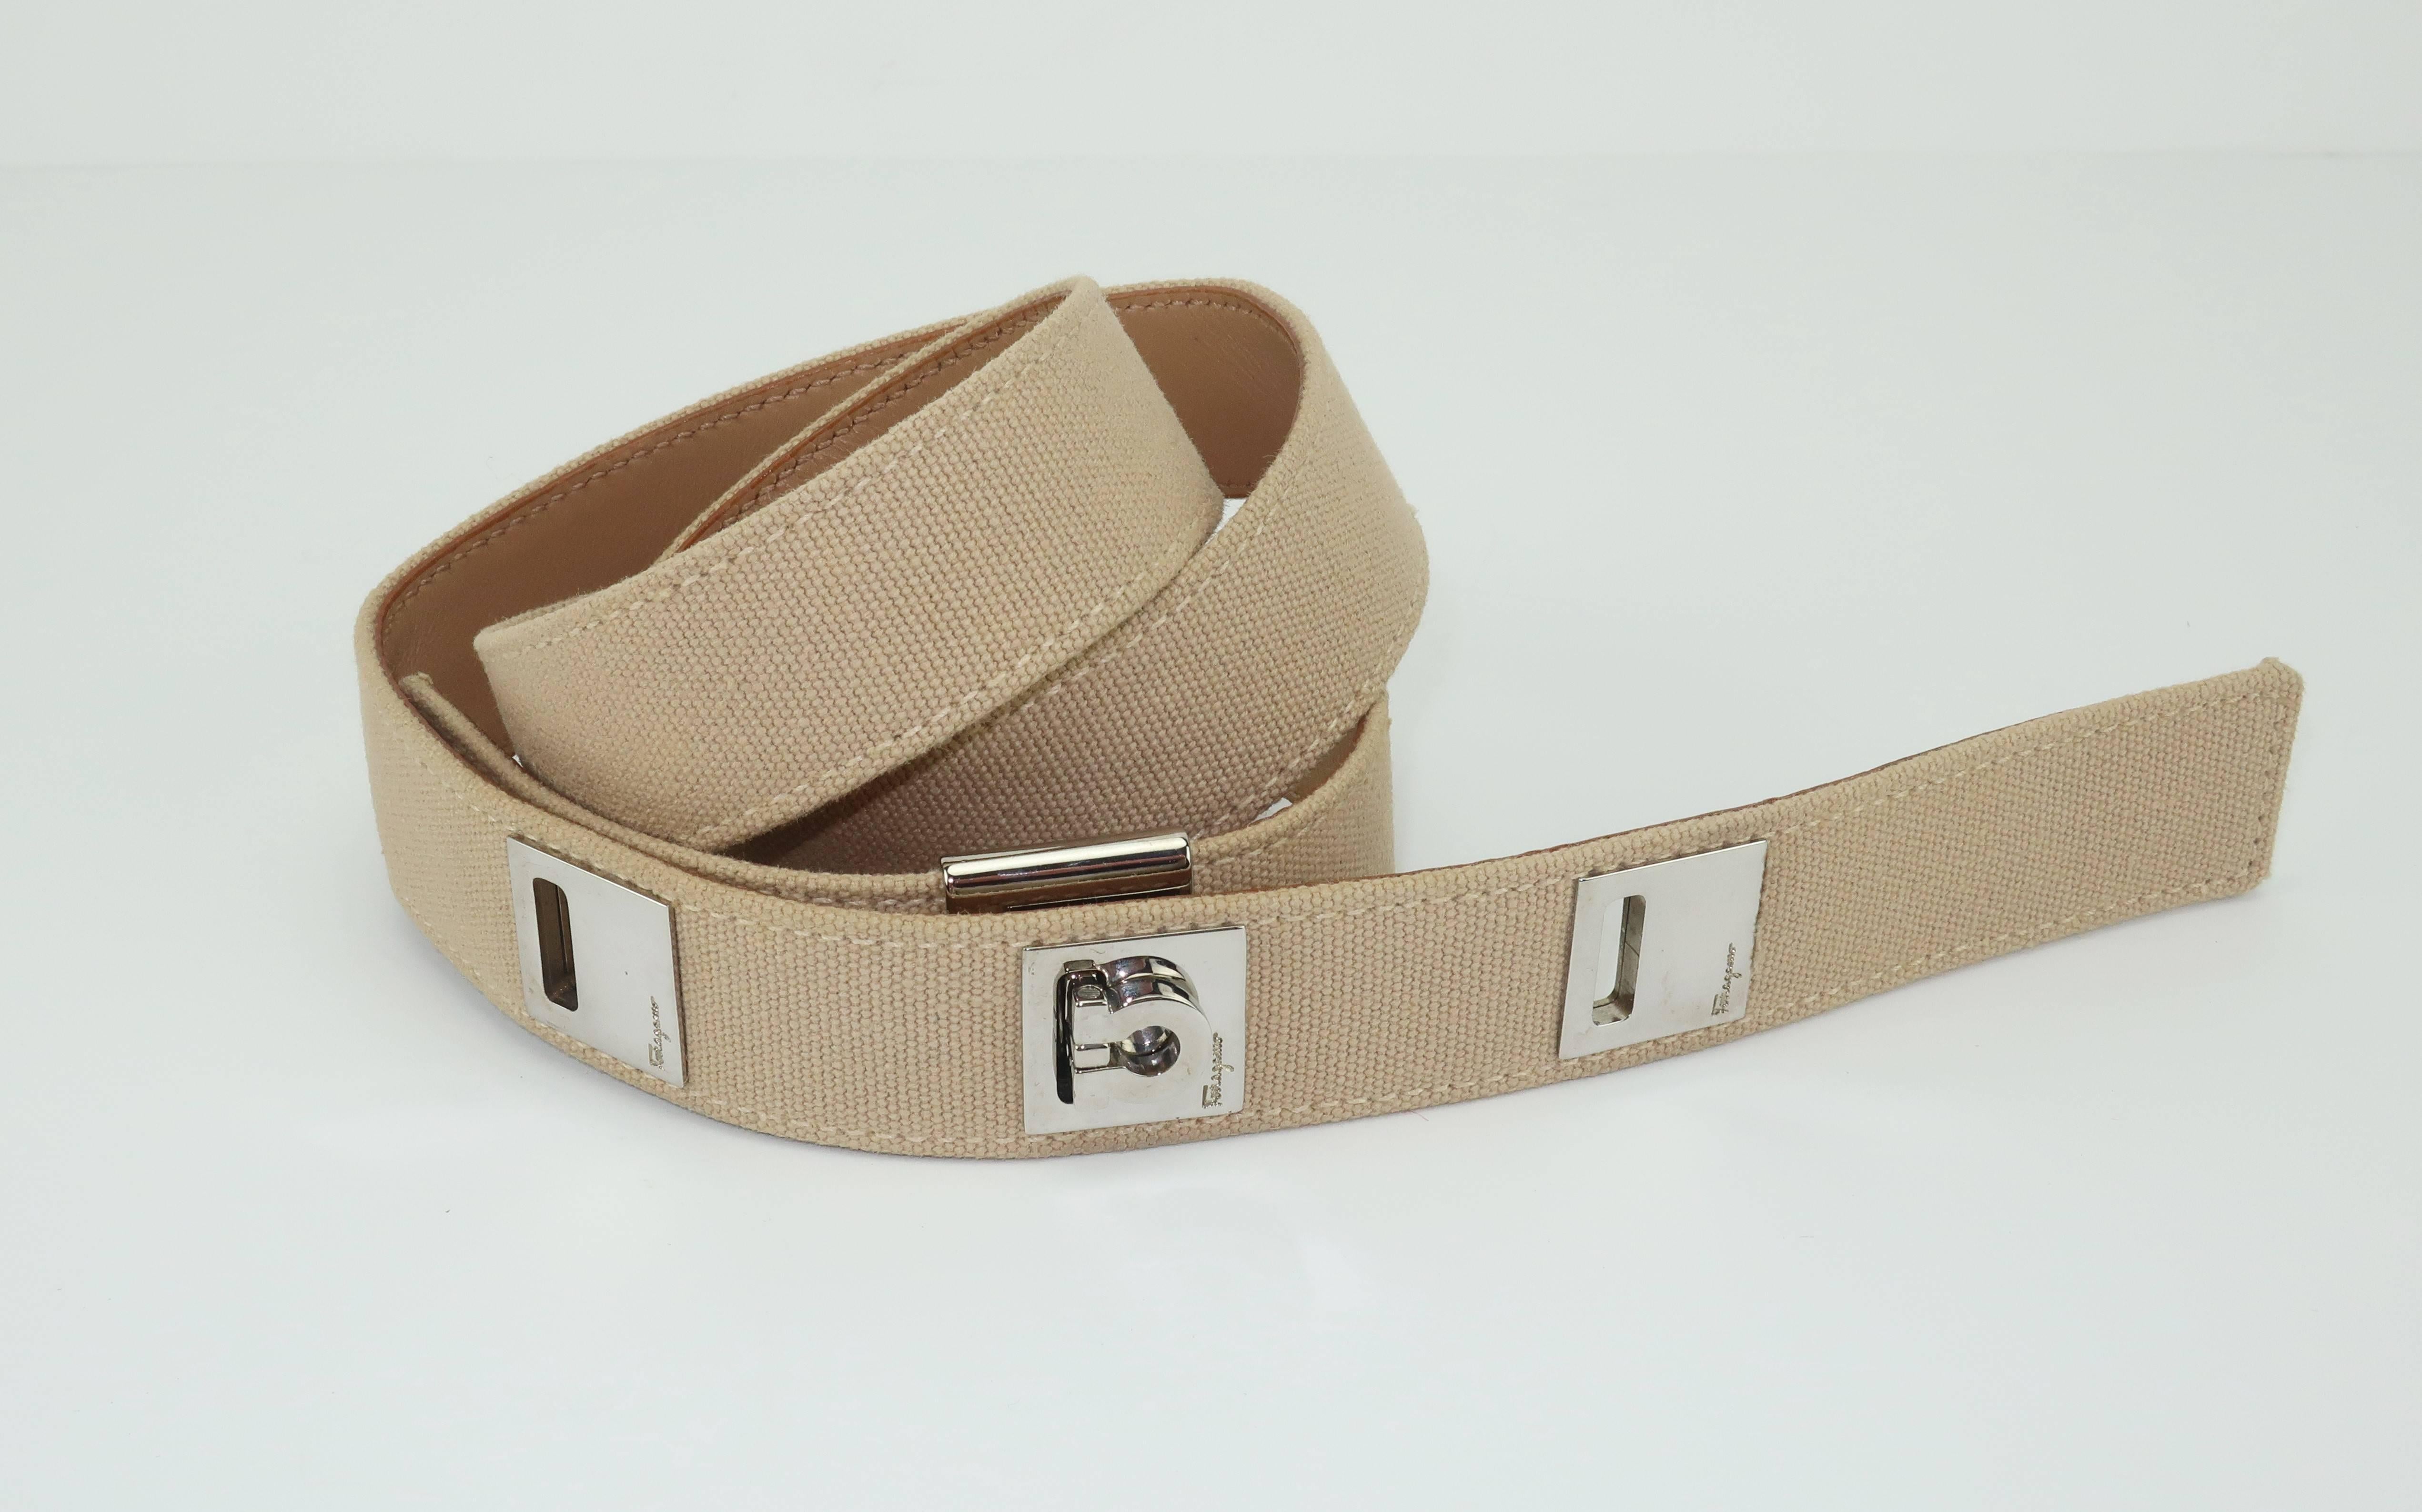 This belt by Ferragamo has the elements of a fashionable safari style with a unique contemporary chromed silver logo buckle.  The light beige canvas body is backed by a coordinating leather and accented with three slotted chrome squares impressed